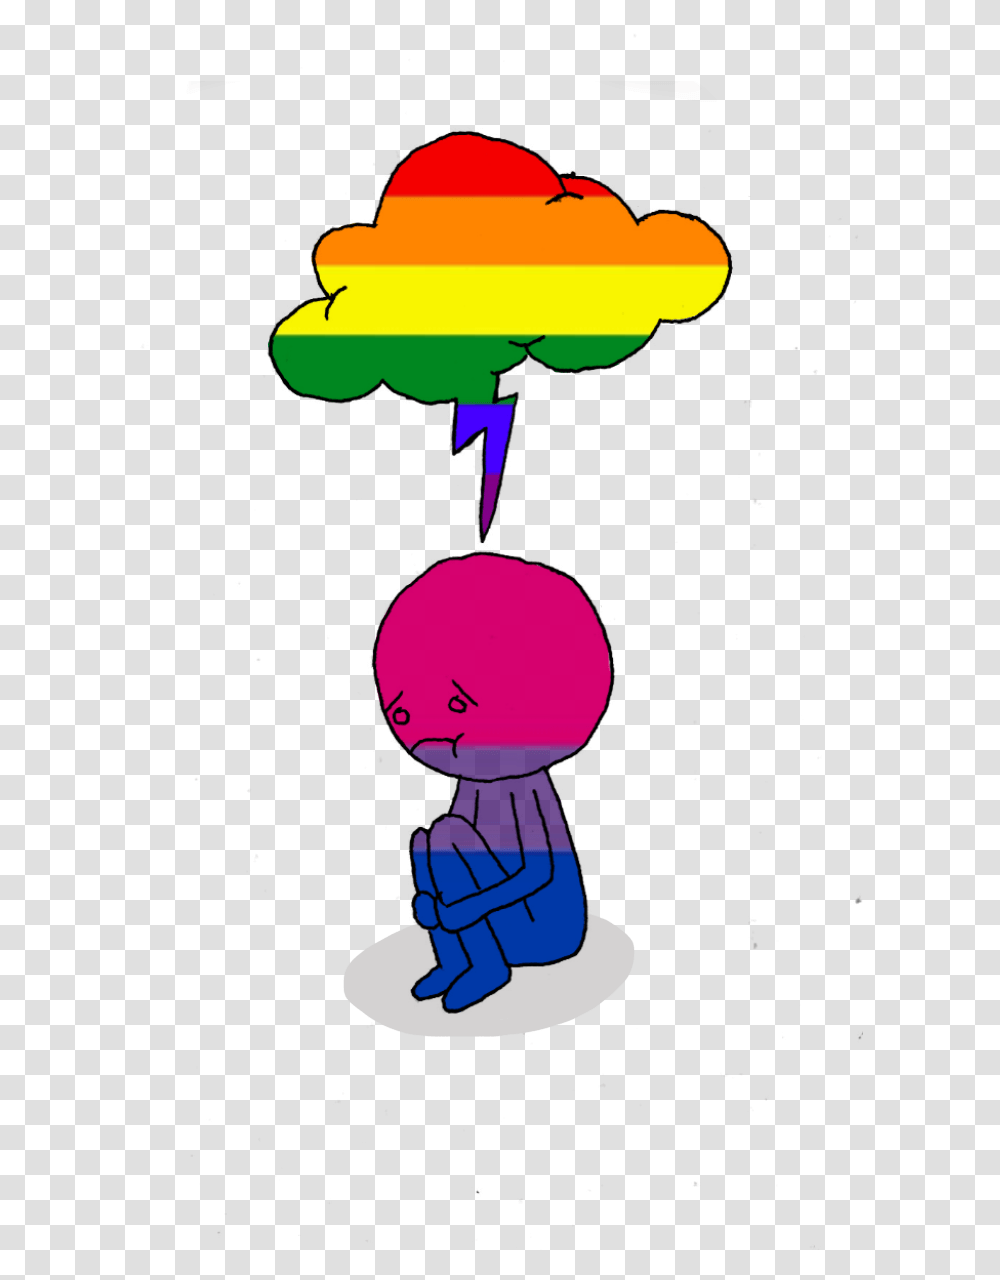 Acknowledging The B In LgbtqClass Img Responsive Transparent Png